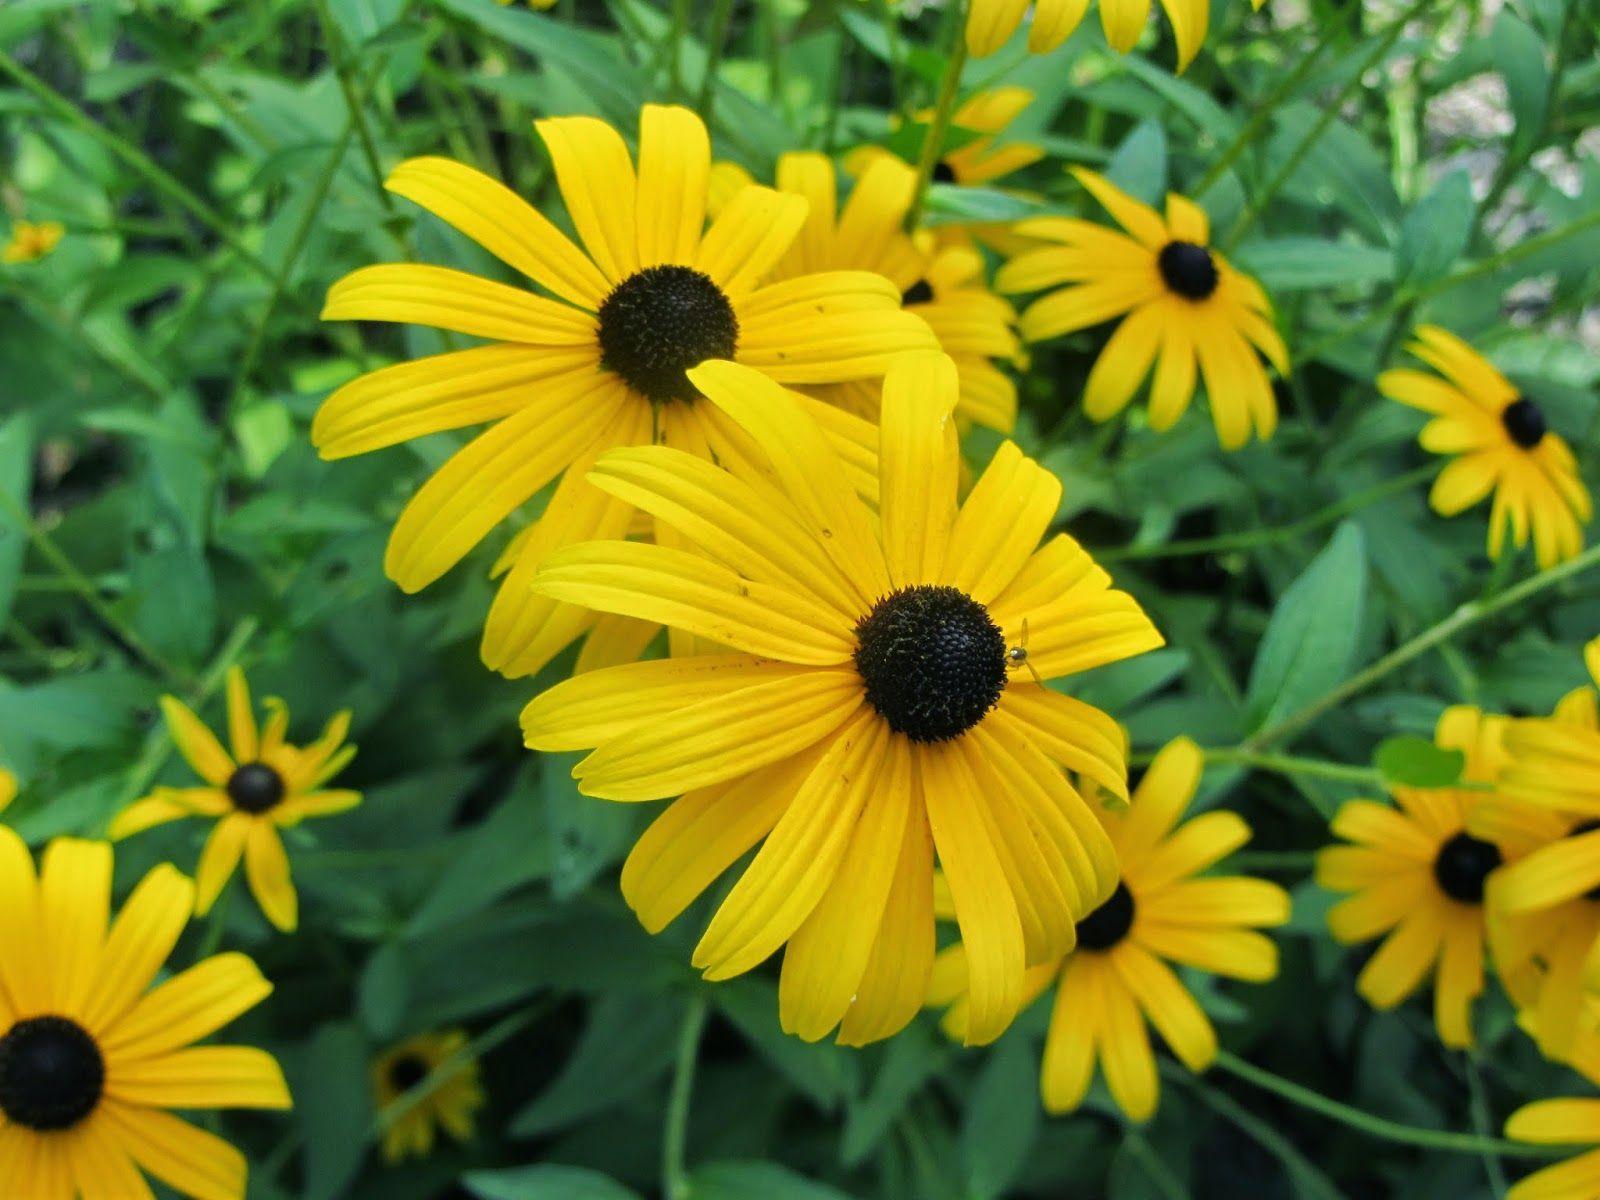 Black Eyed Susan is the state flower.Maryland. Maryland